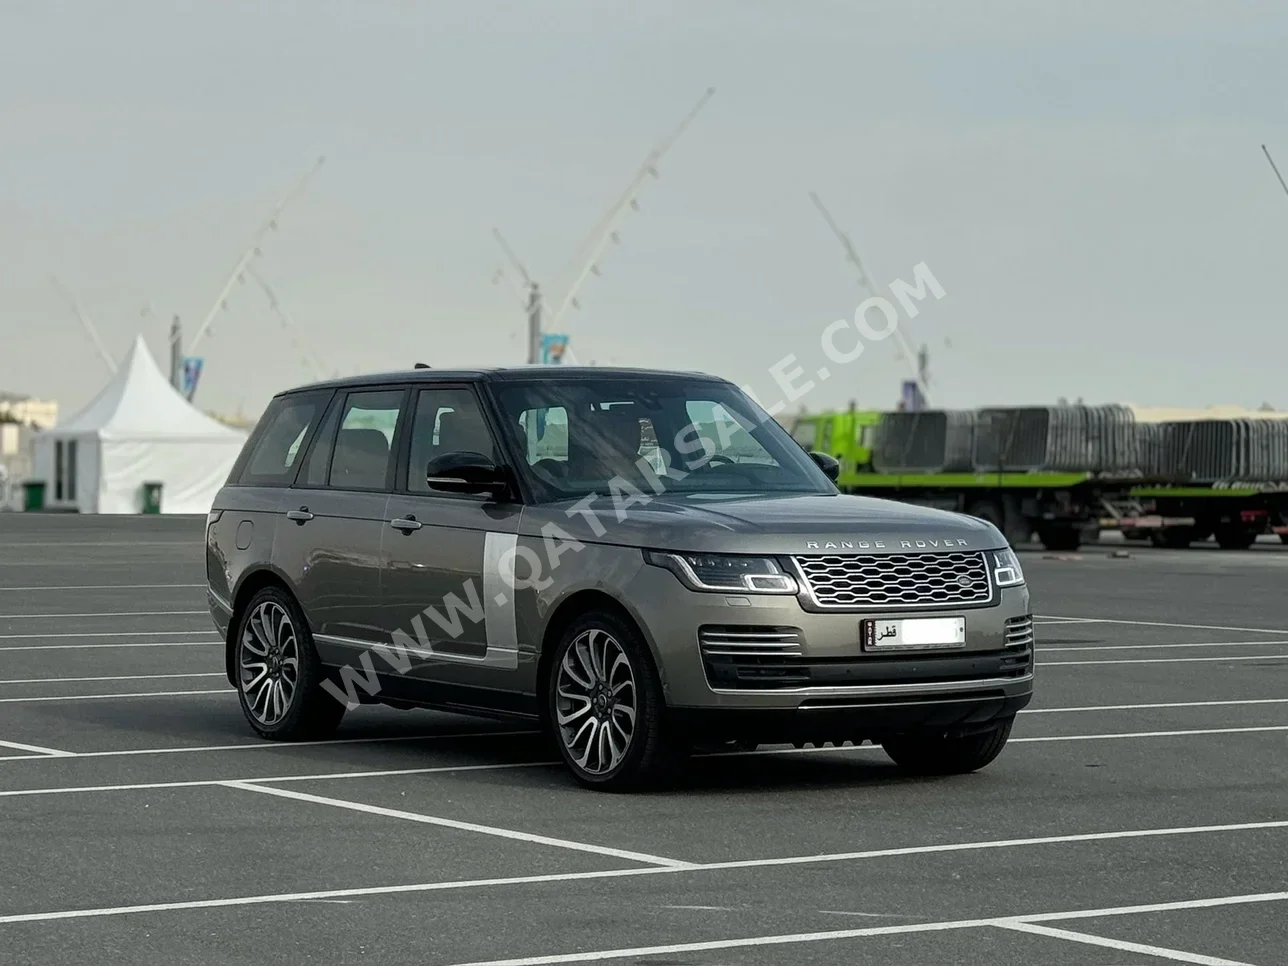 Land Rover  Range Rover  Vogue  Autobiography  2018  Automatic  54,000 Km  8 Cylinder  Four Wheel Drive (4WD)  SUV  Gray